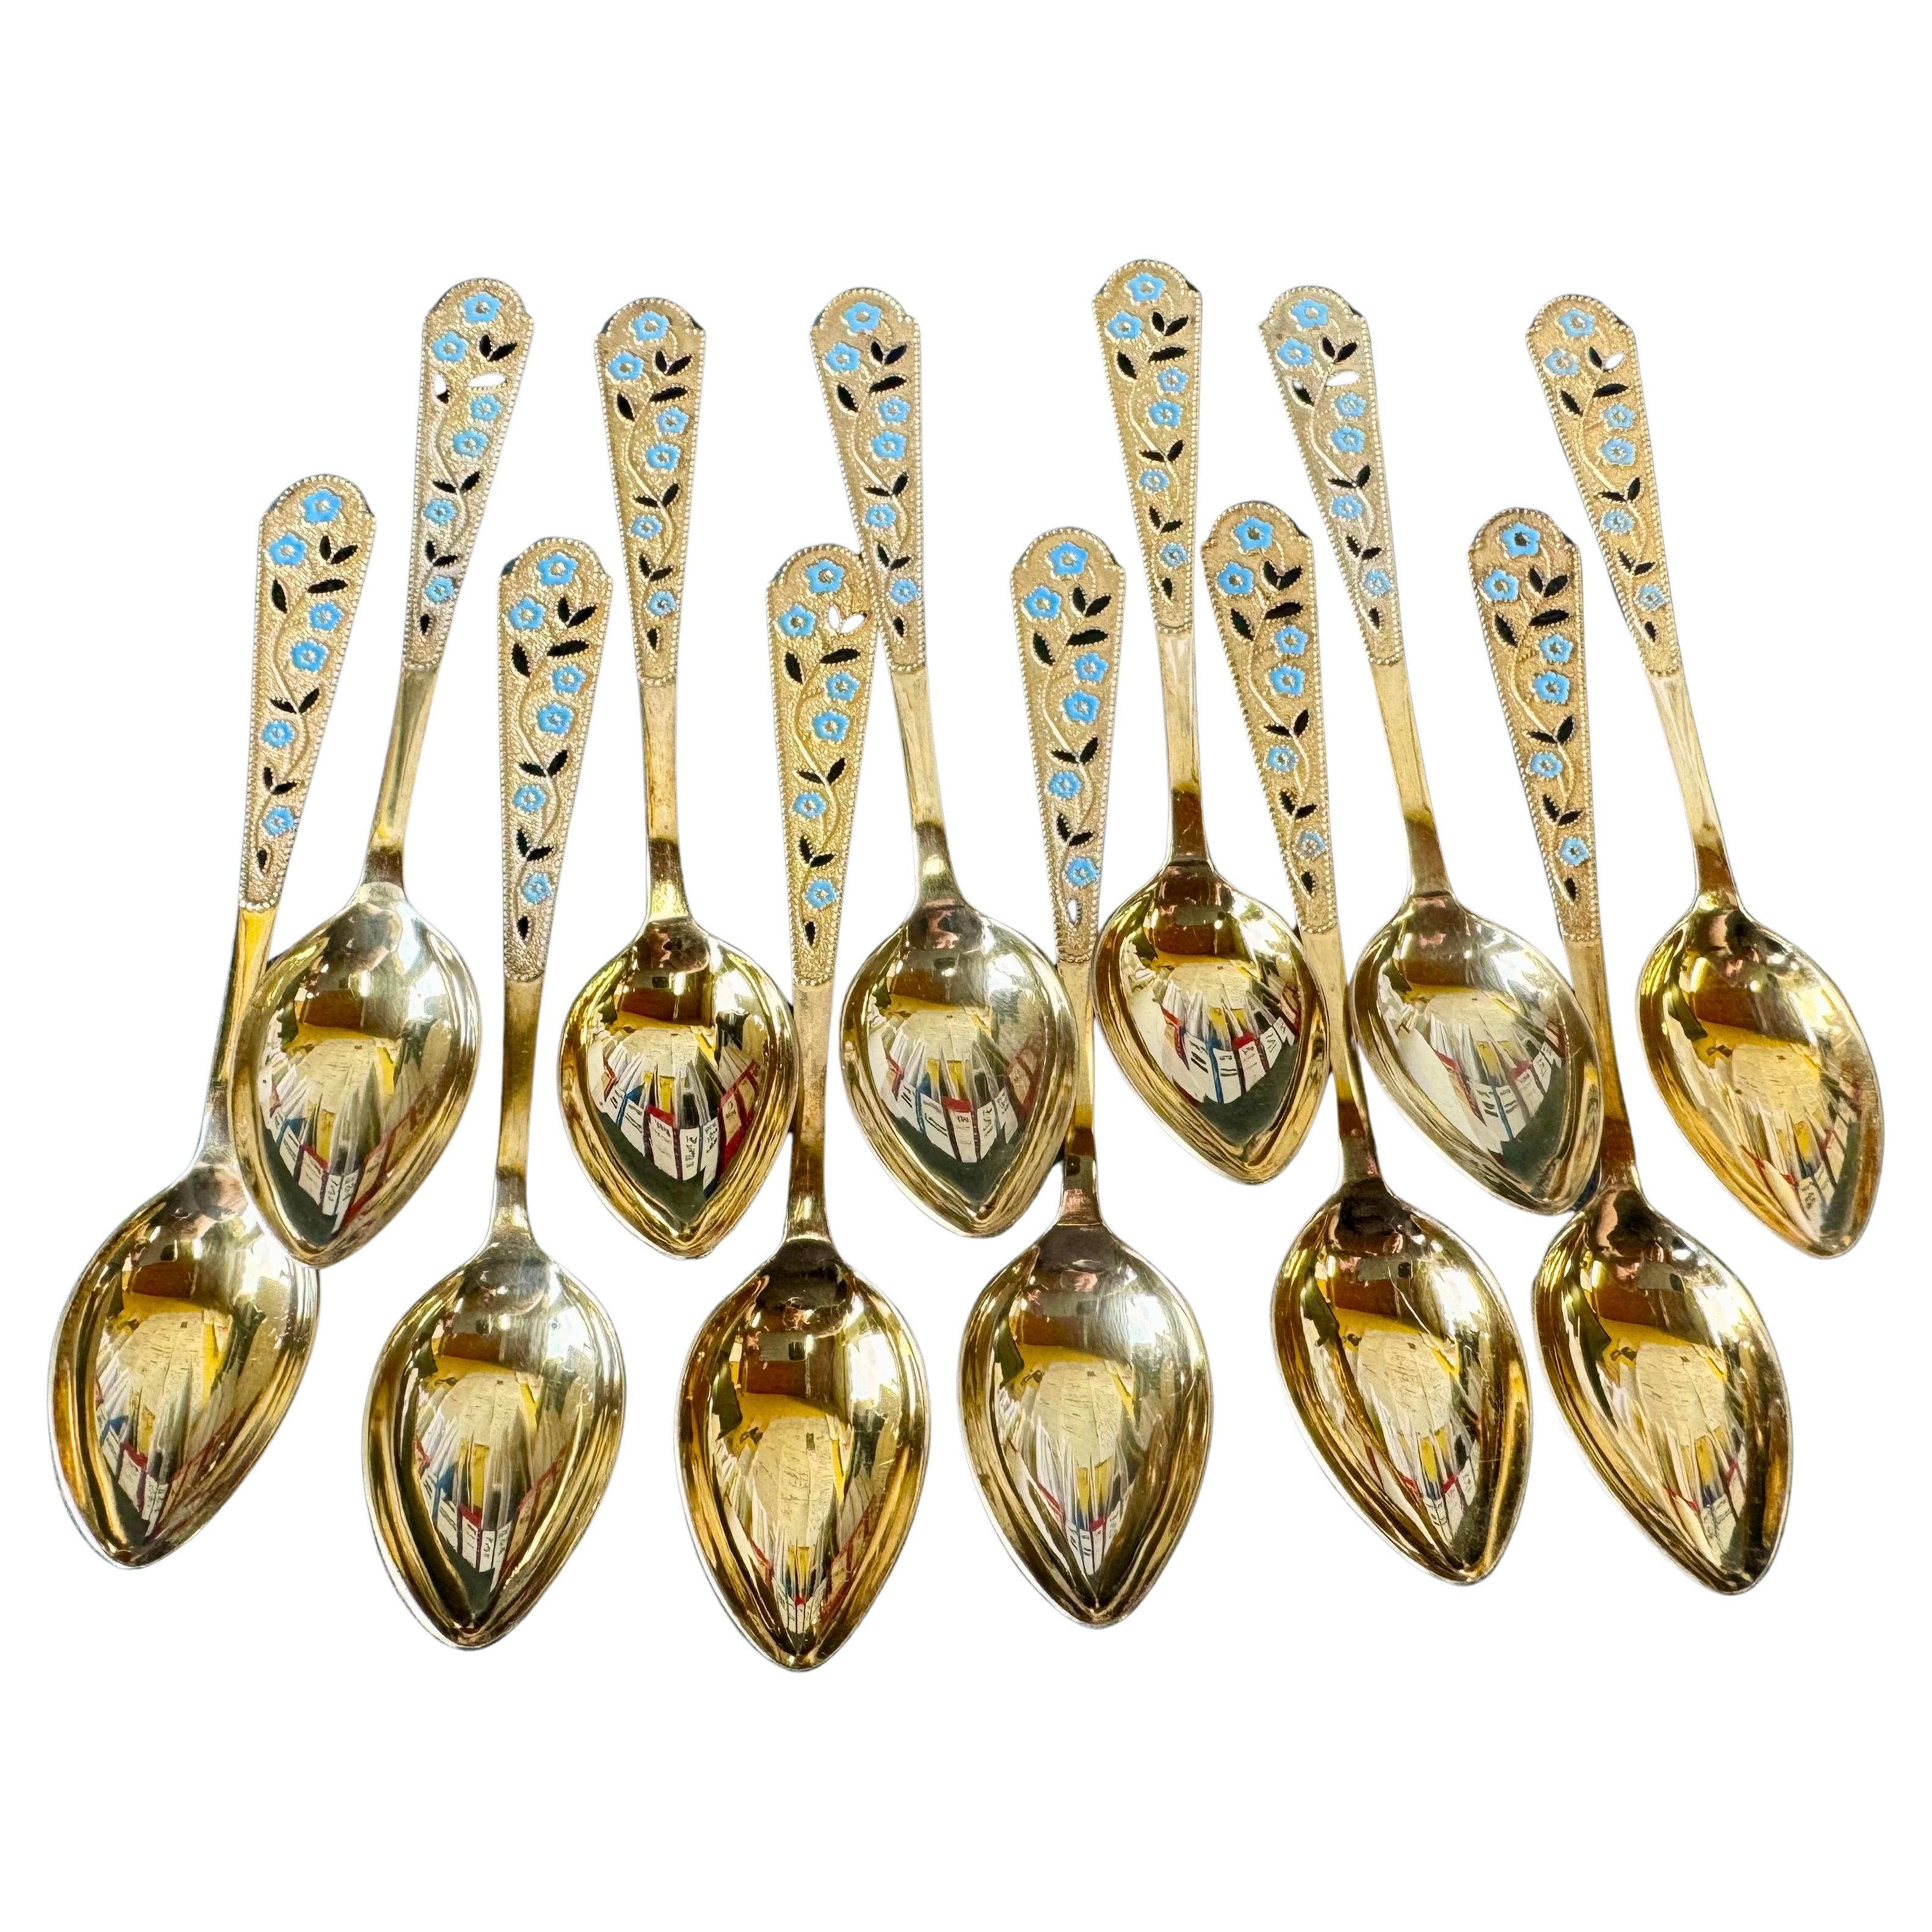 Set of 12 Russian Enamel Spoons Fine and Rare Soviet Silver Spoons